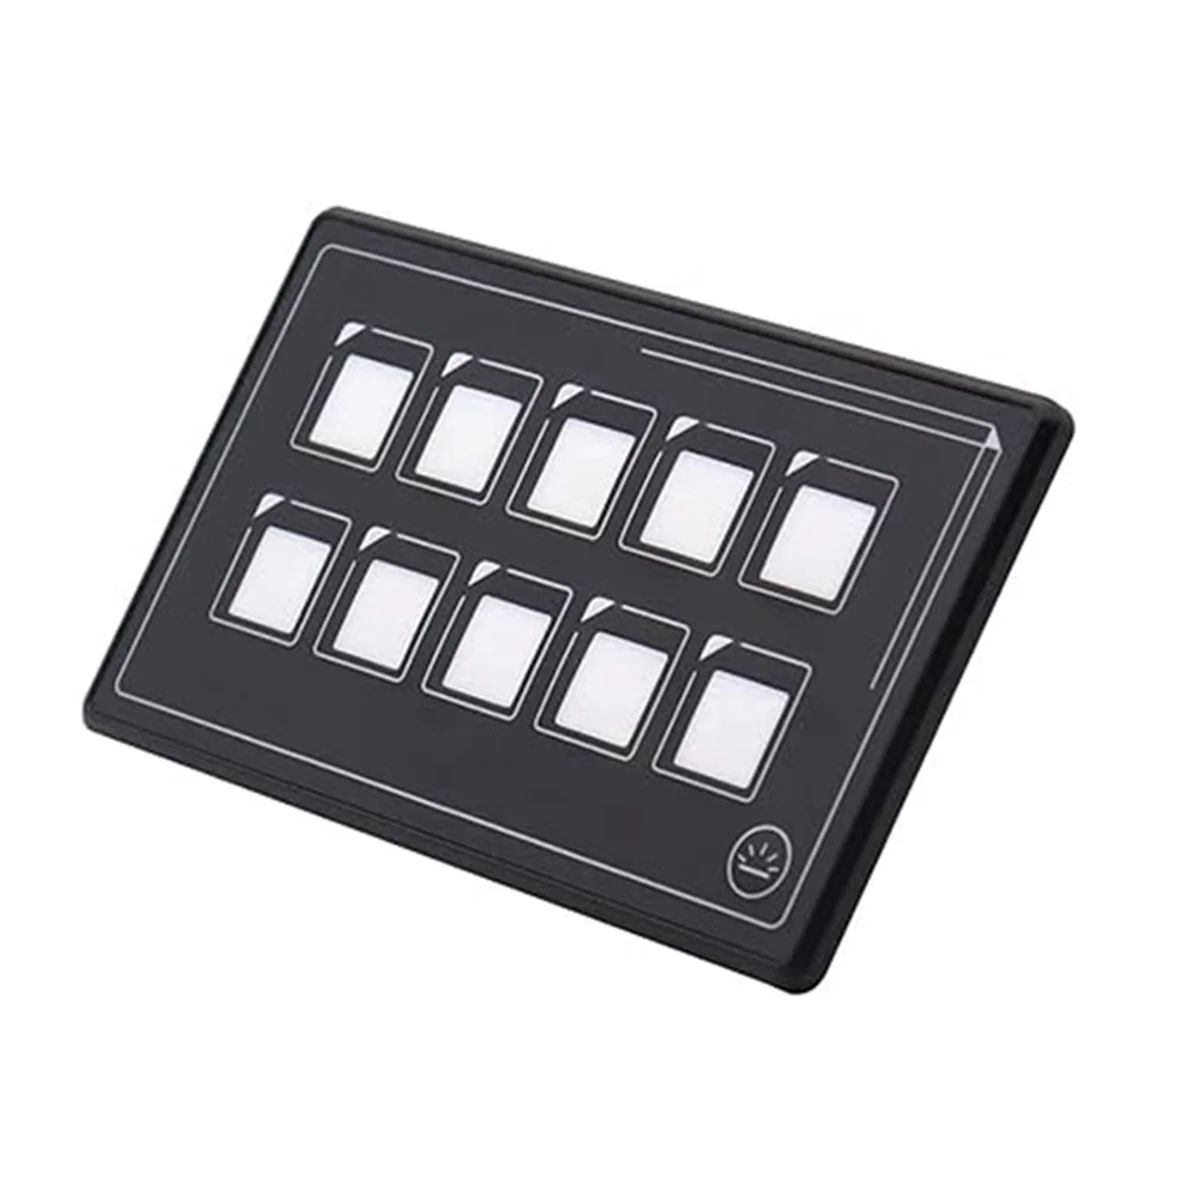 

10-Bit Bluetooth Switch Panel, Push Button Switch Auxiliary Panel, Touch Type Backlit Membrane Control Switch Box